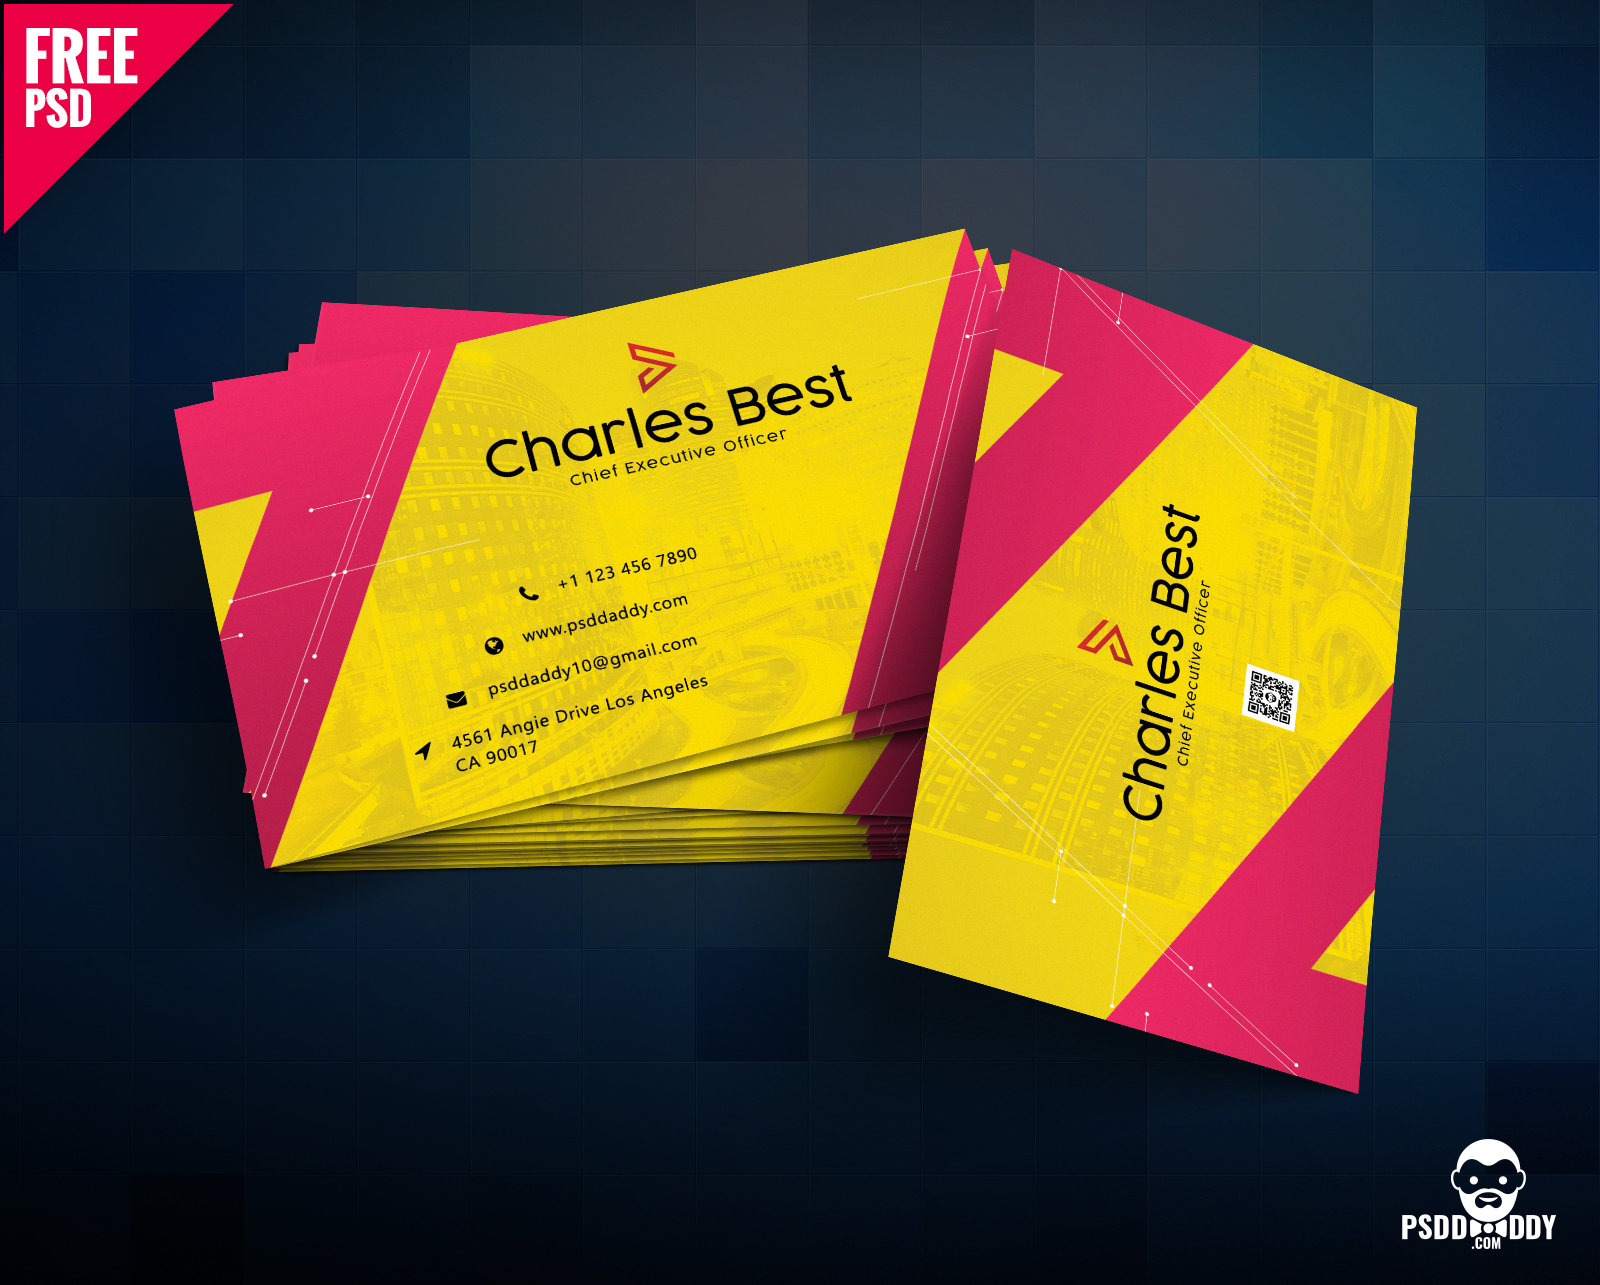 Download] Creative Business Card Free Psd | Psddaddy Inside Calling Card Psd Template